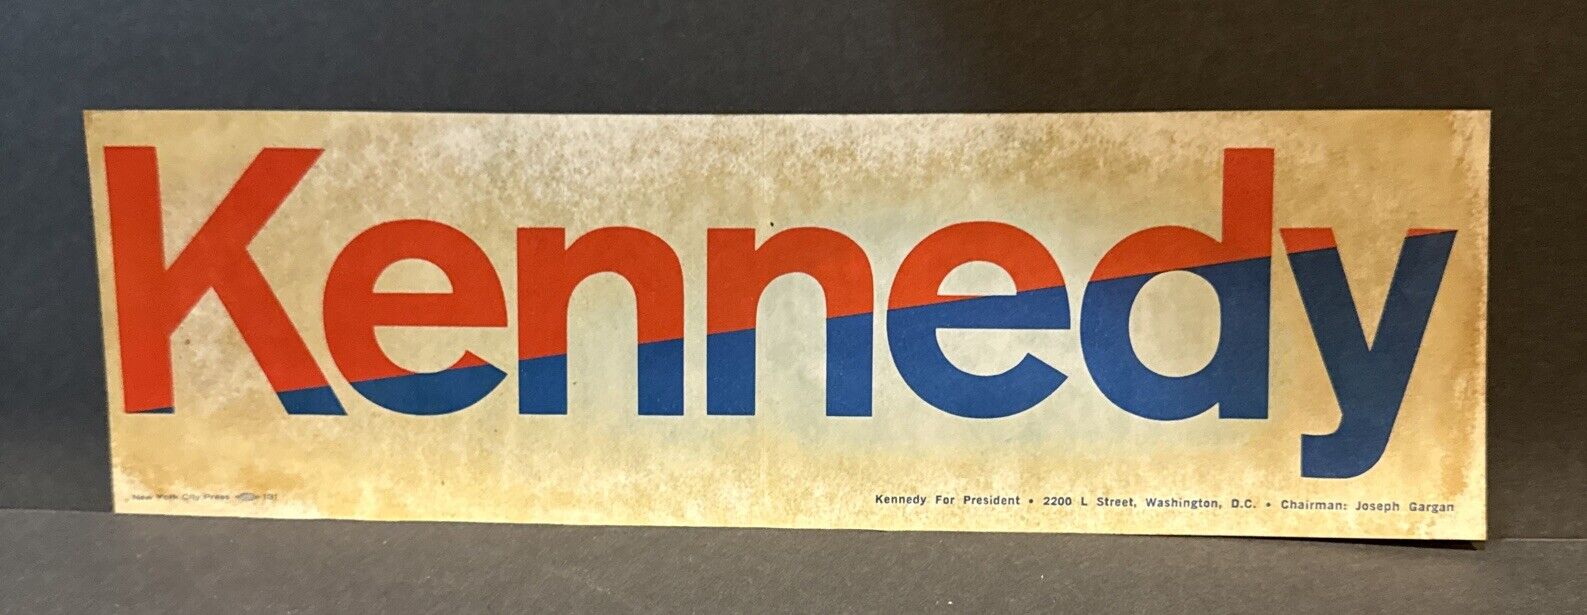 ROBERT F KENNEDY PRESIDENTIAL BUMPER STICKER 1968 ELECTION VINTAGE NEVER USED